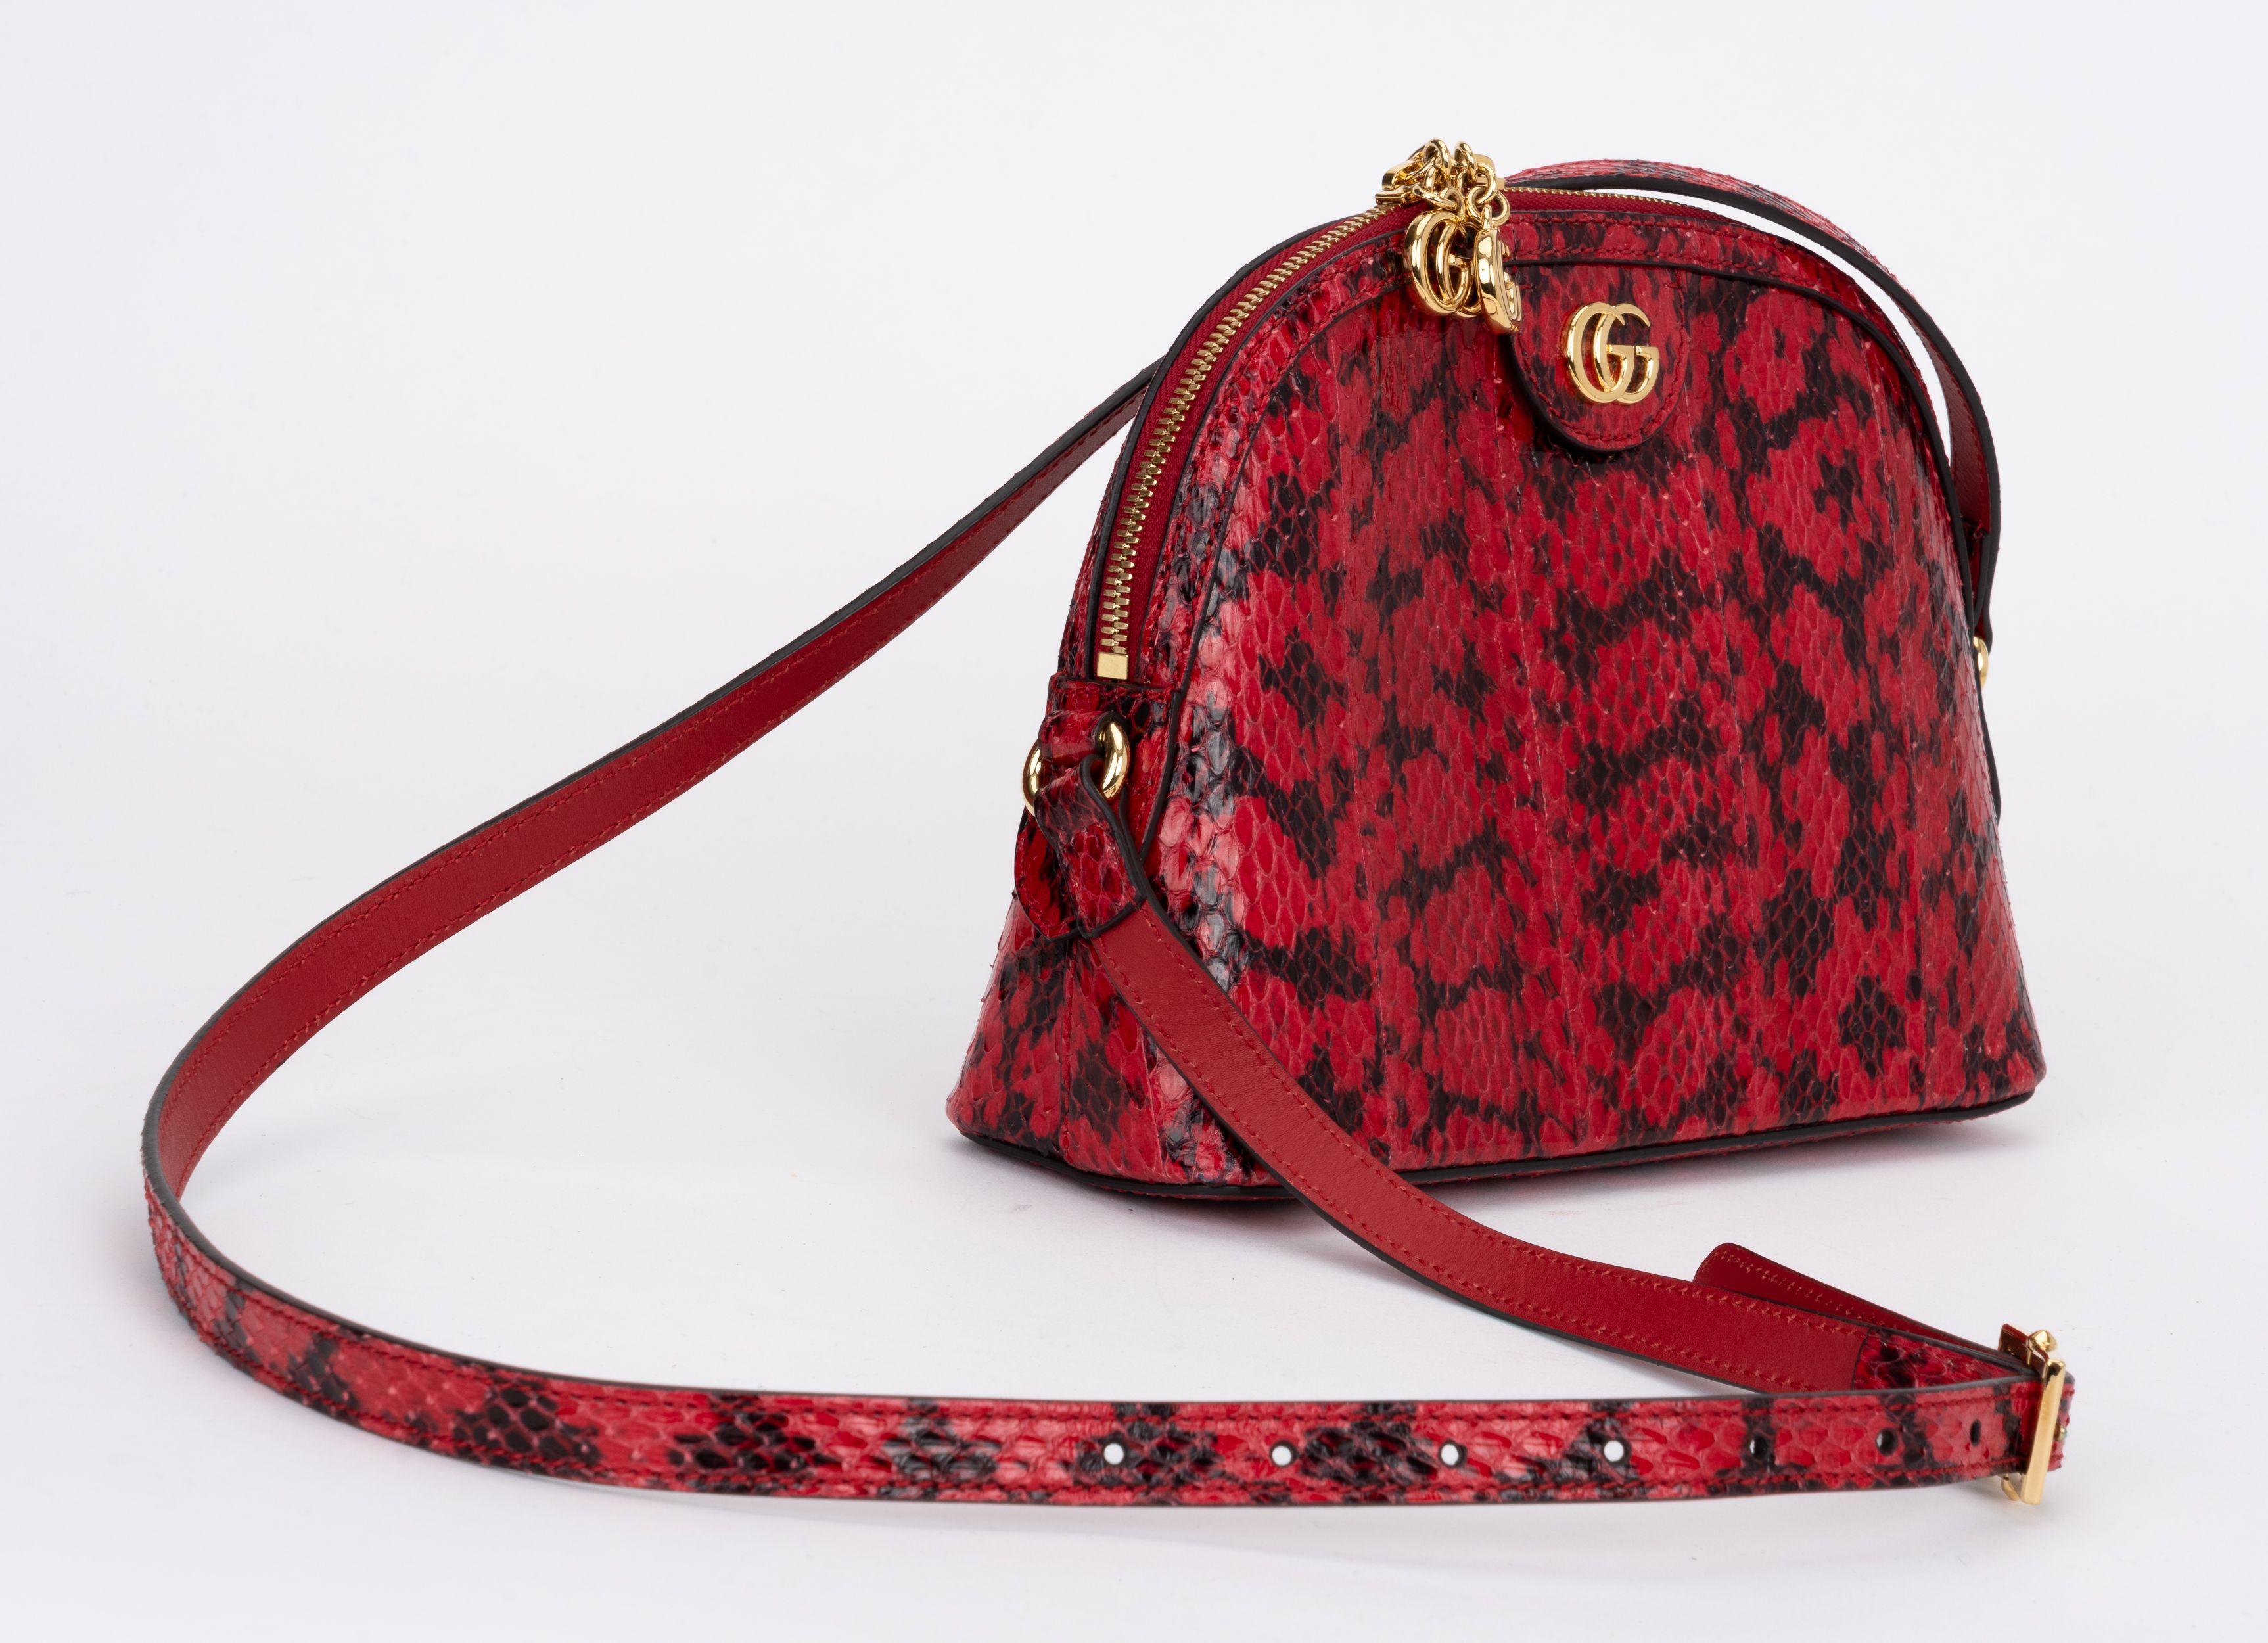 Gucci brand new red water snake leather bag, can be worn shoulder or cross body. 
Shoulder drop minimum 19